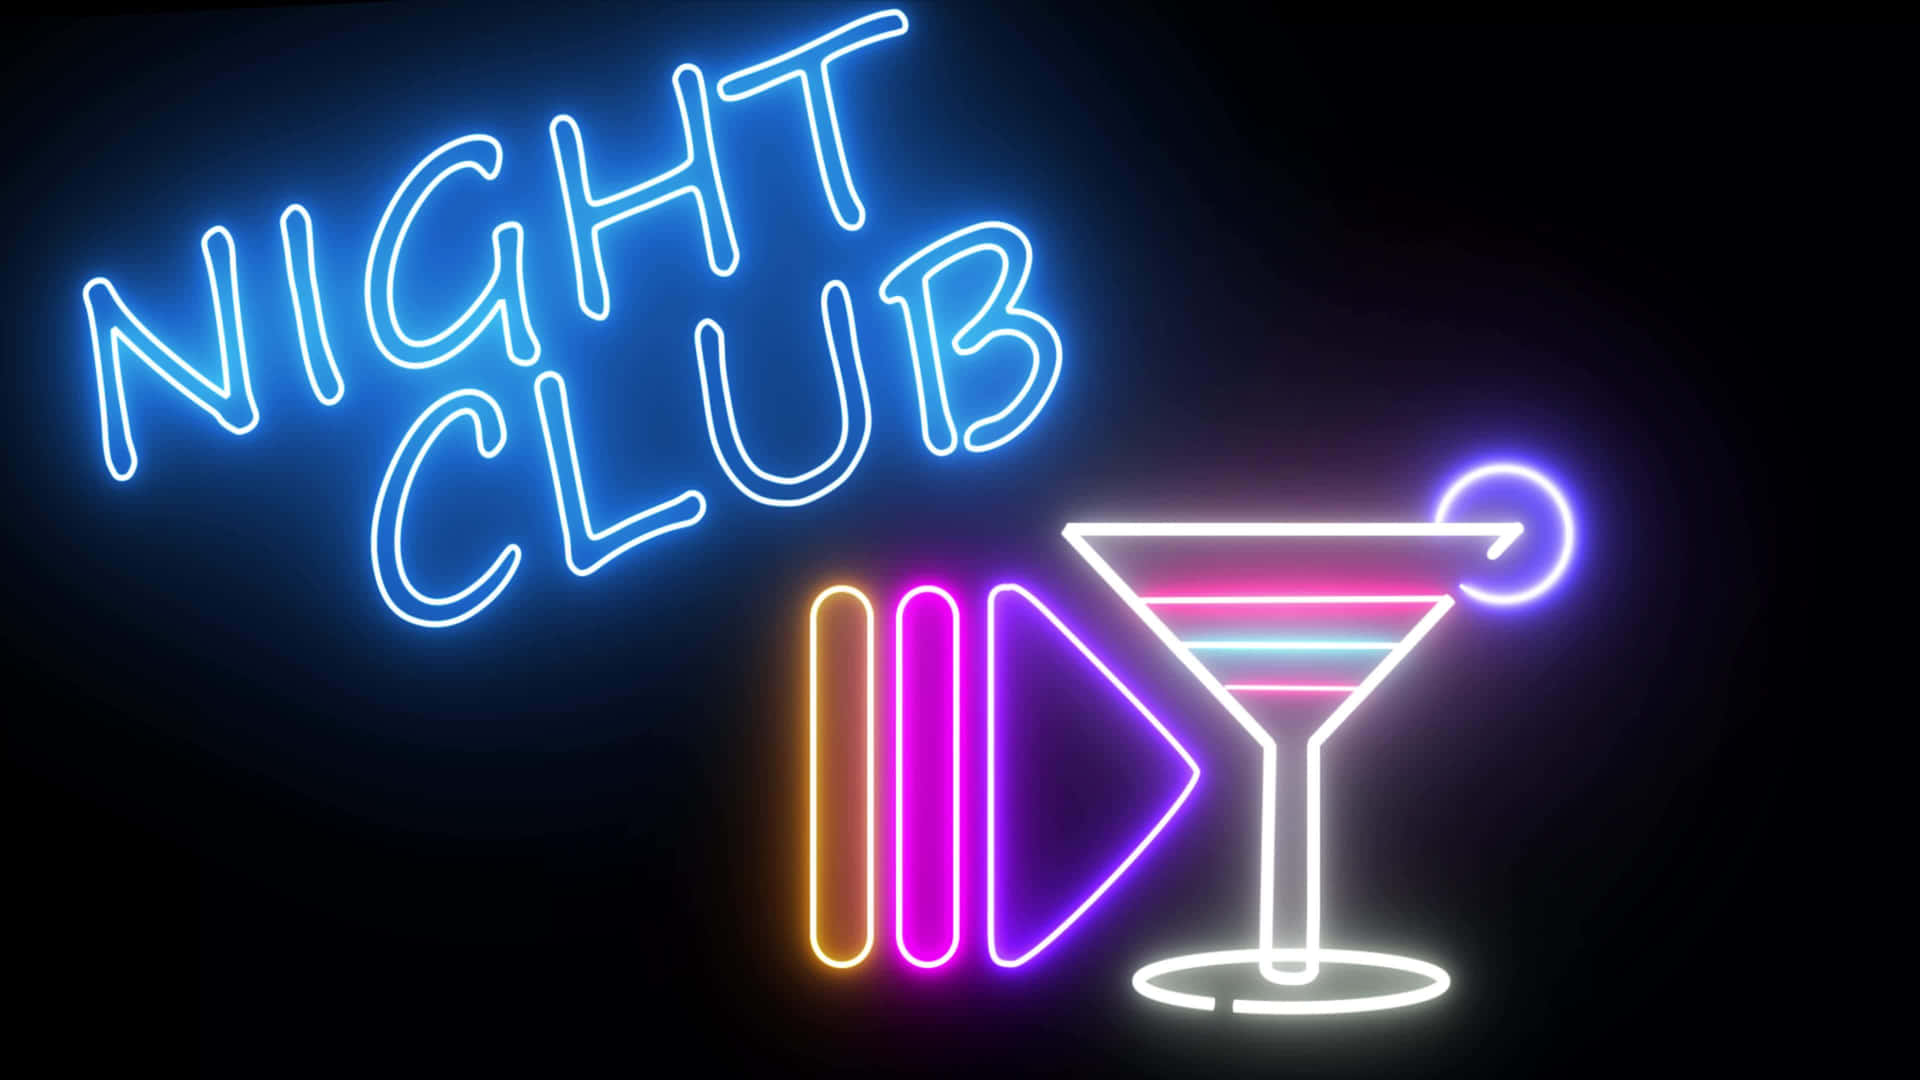 Experience an unforgettable night out at the hottest club in town.